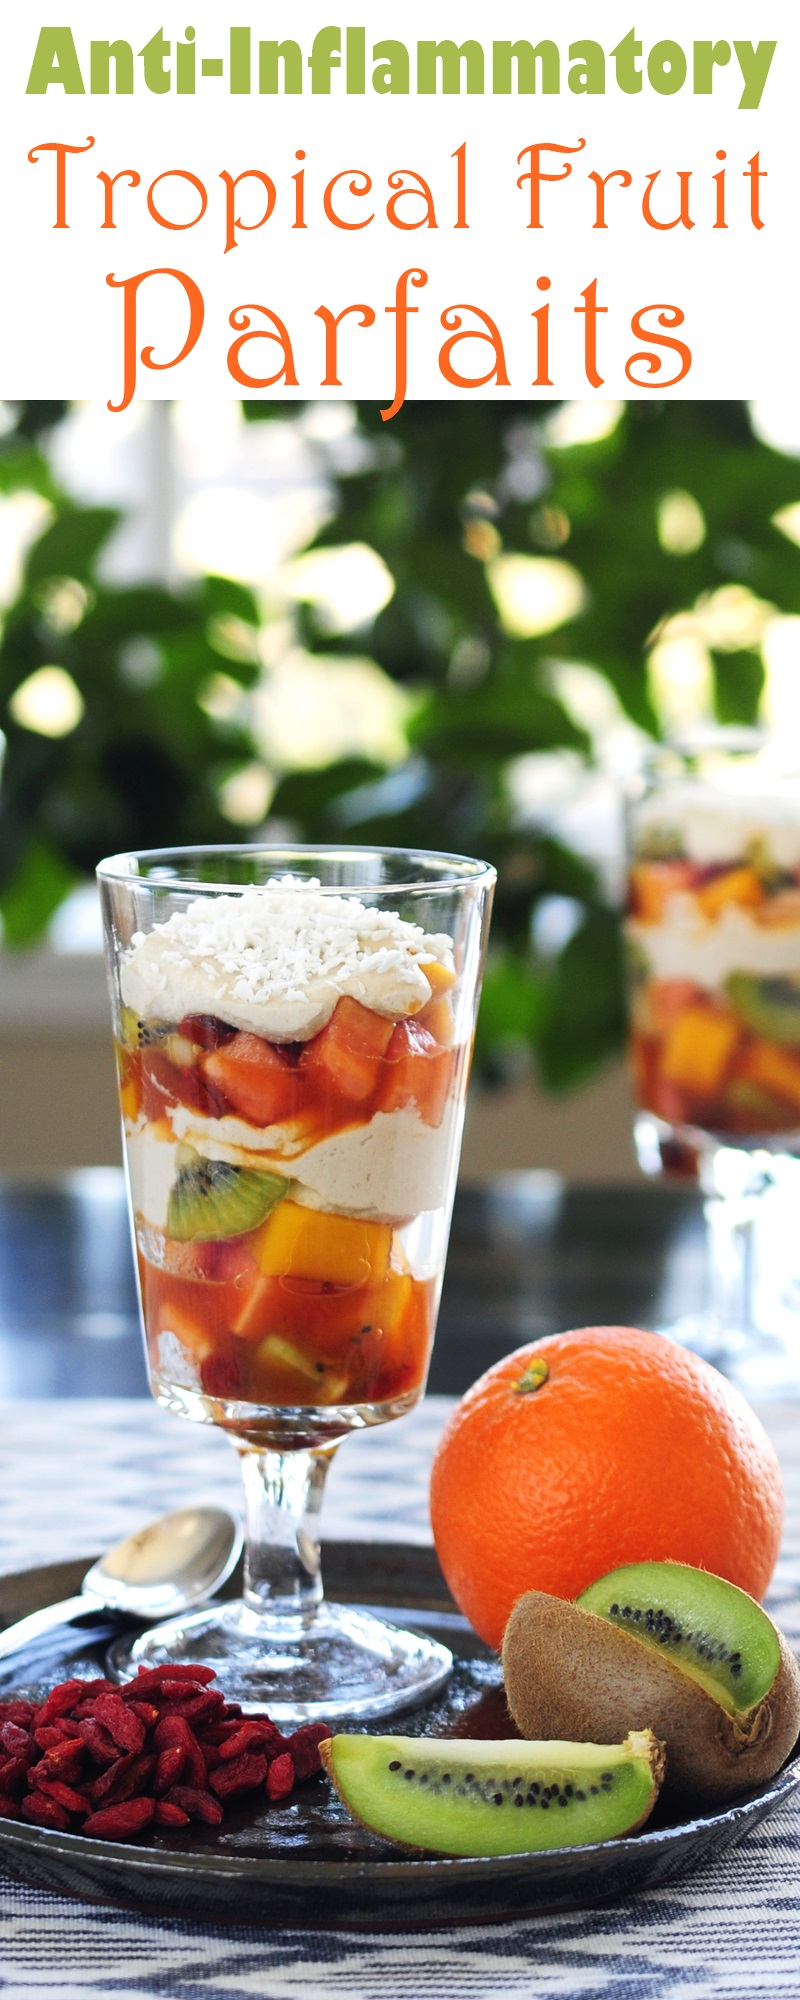 Tropical Fruit Parfaits Recipe with Dairy-Free Vanilla Nut Whipped Topping: A Plant-Powered, Anti-Inflammatory Treat